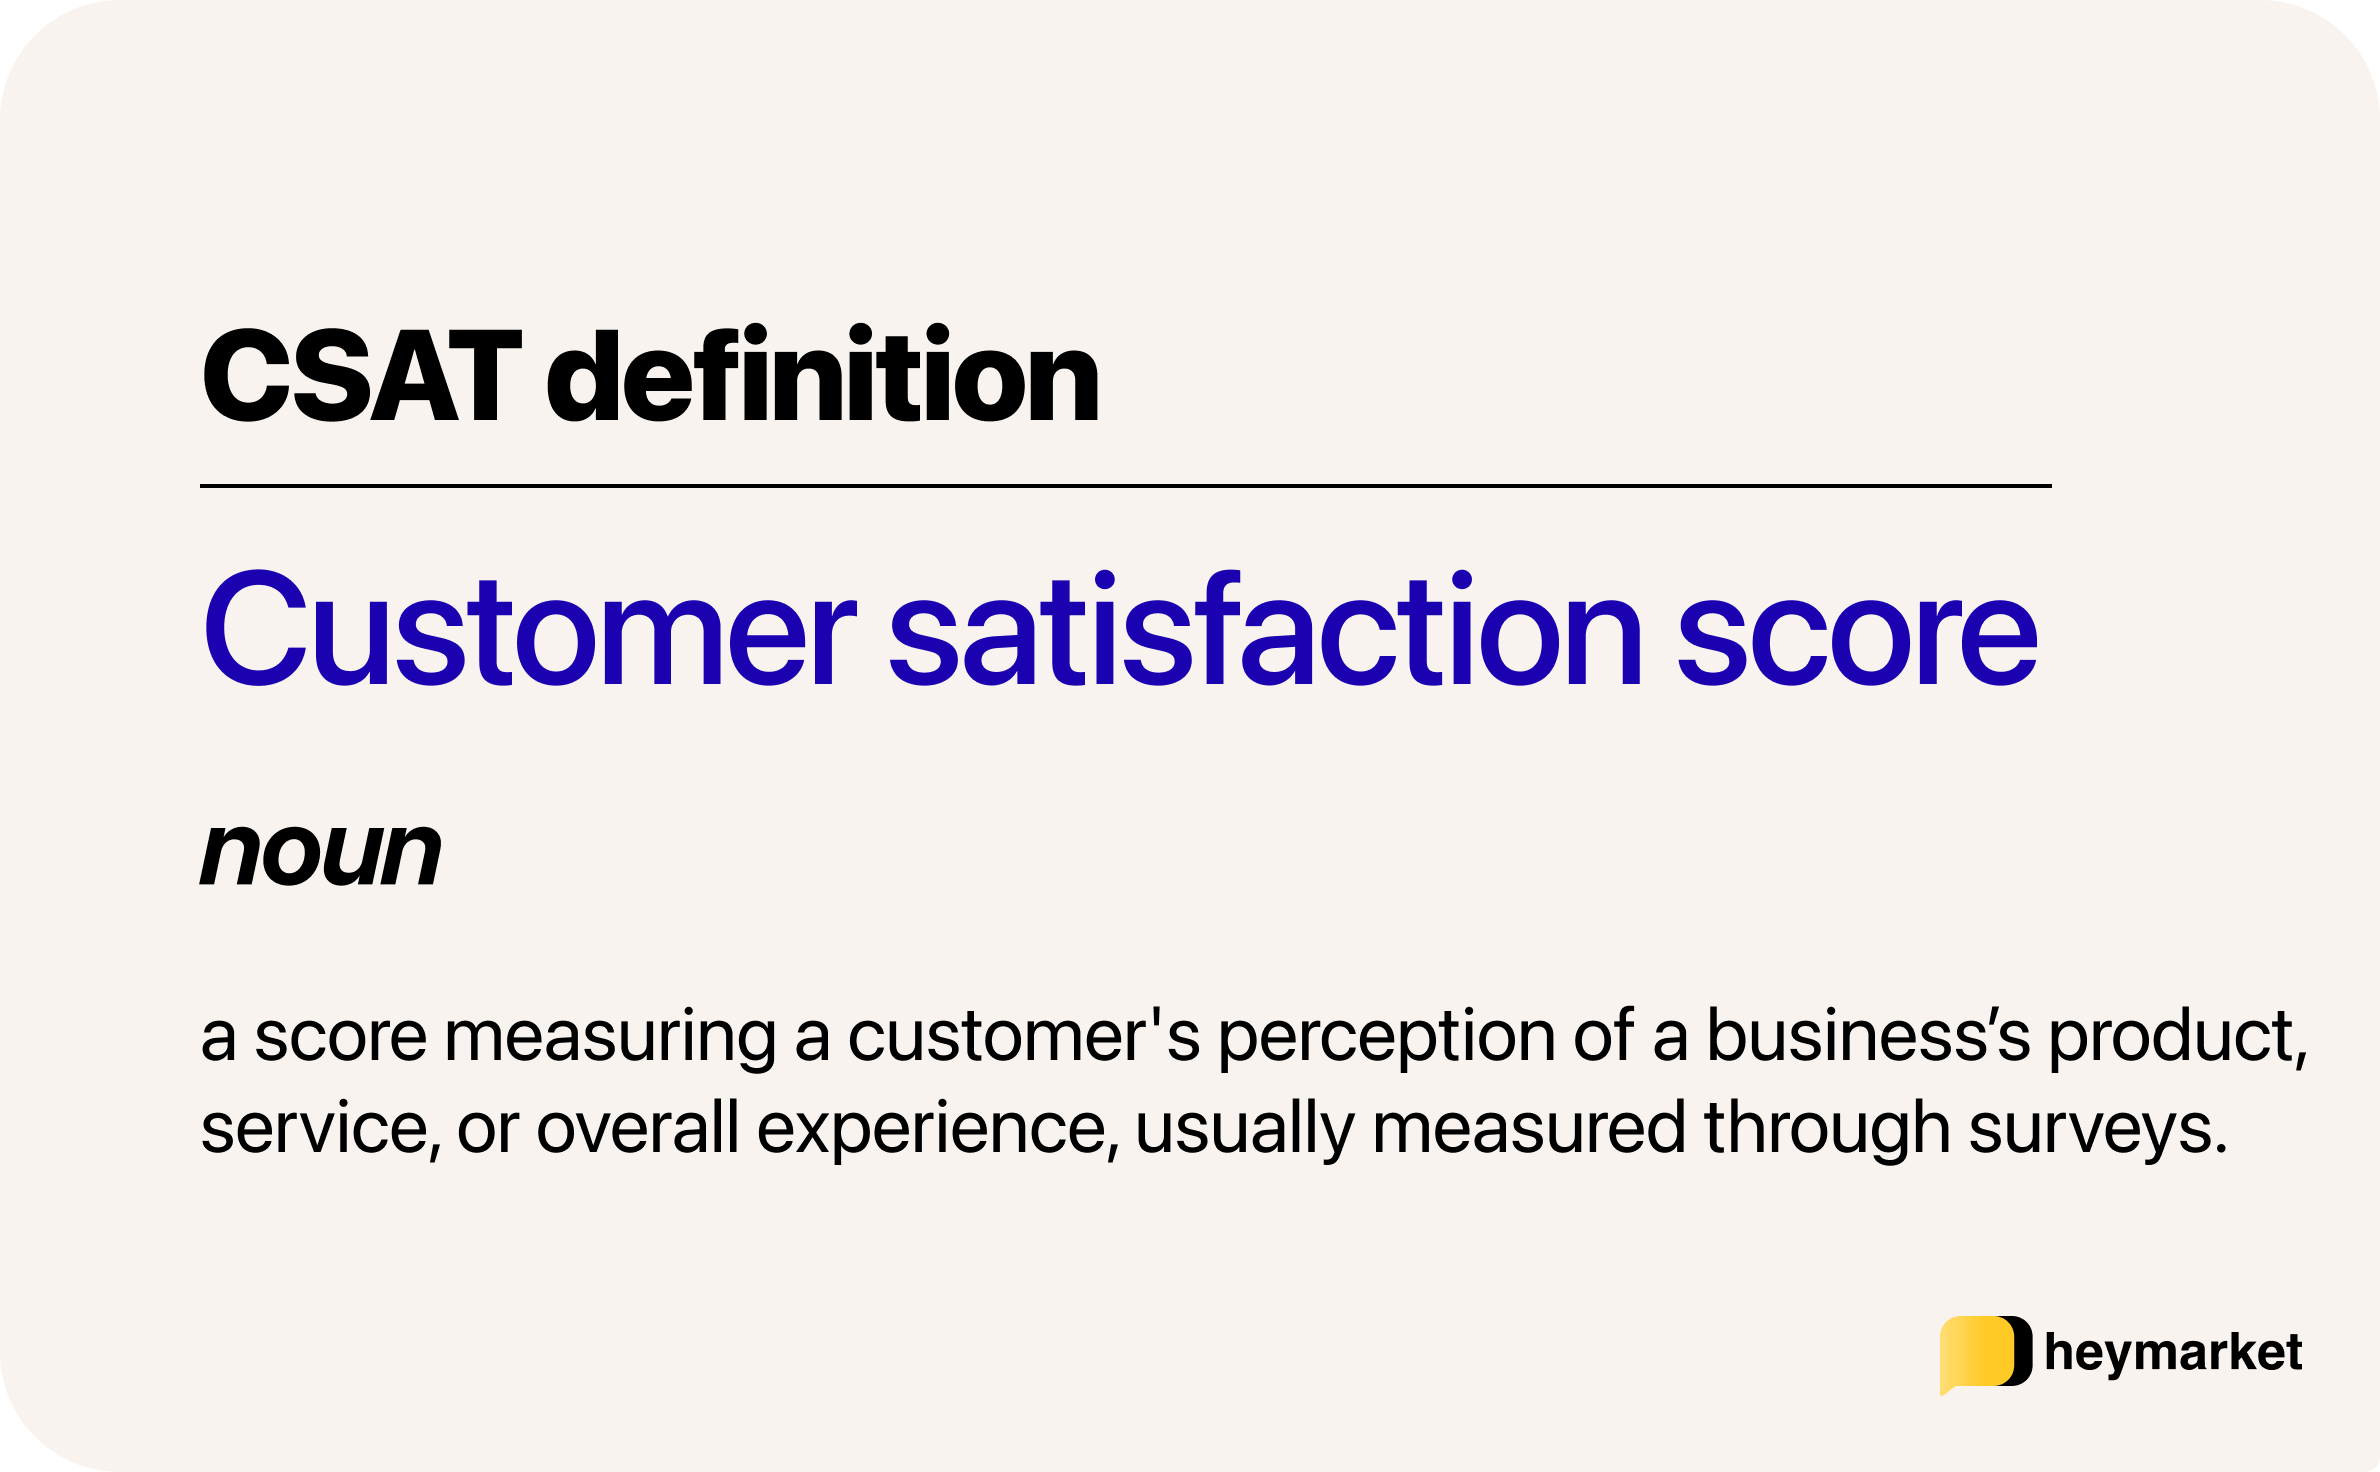 Definition of CSAT: a score measuring a customer's perception of a business’s product, service, or overall experience, usually measured through surveys.